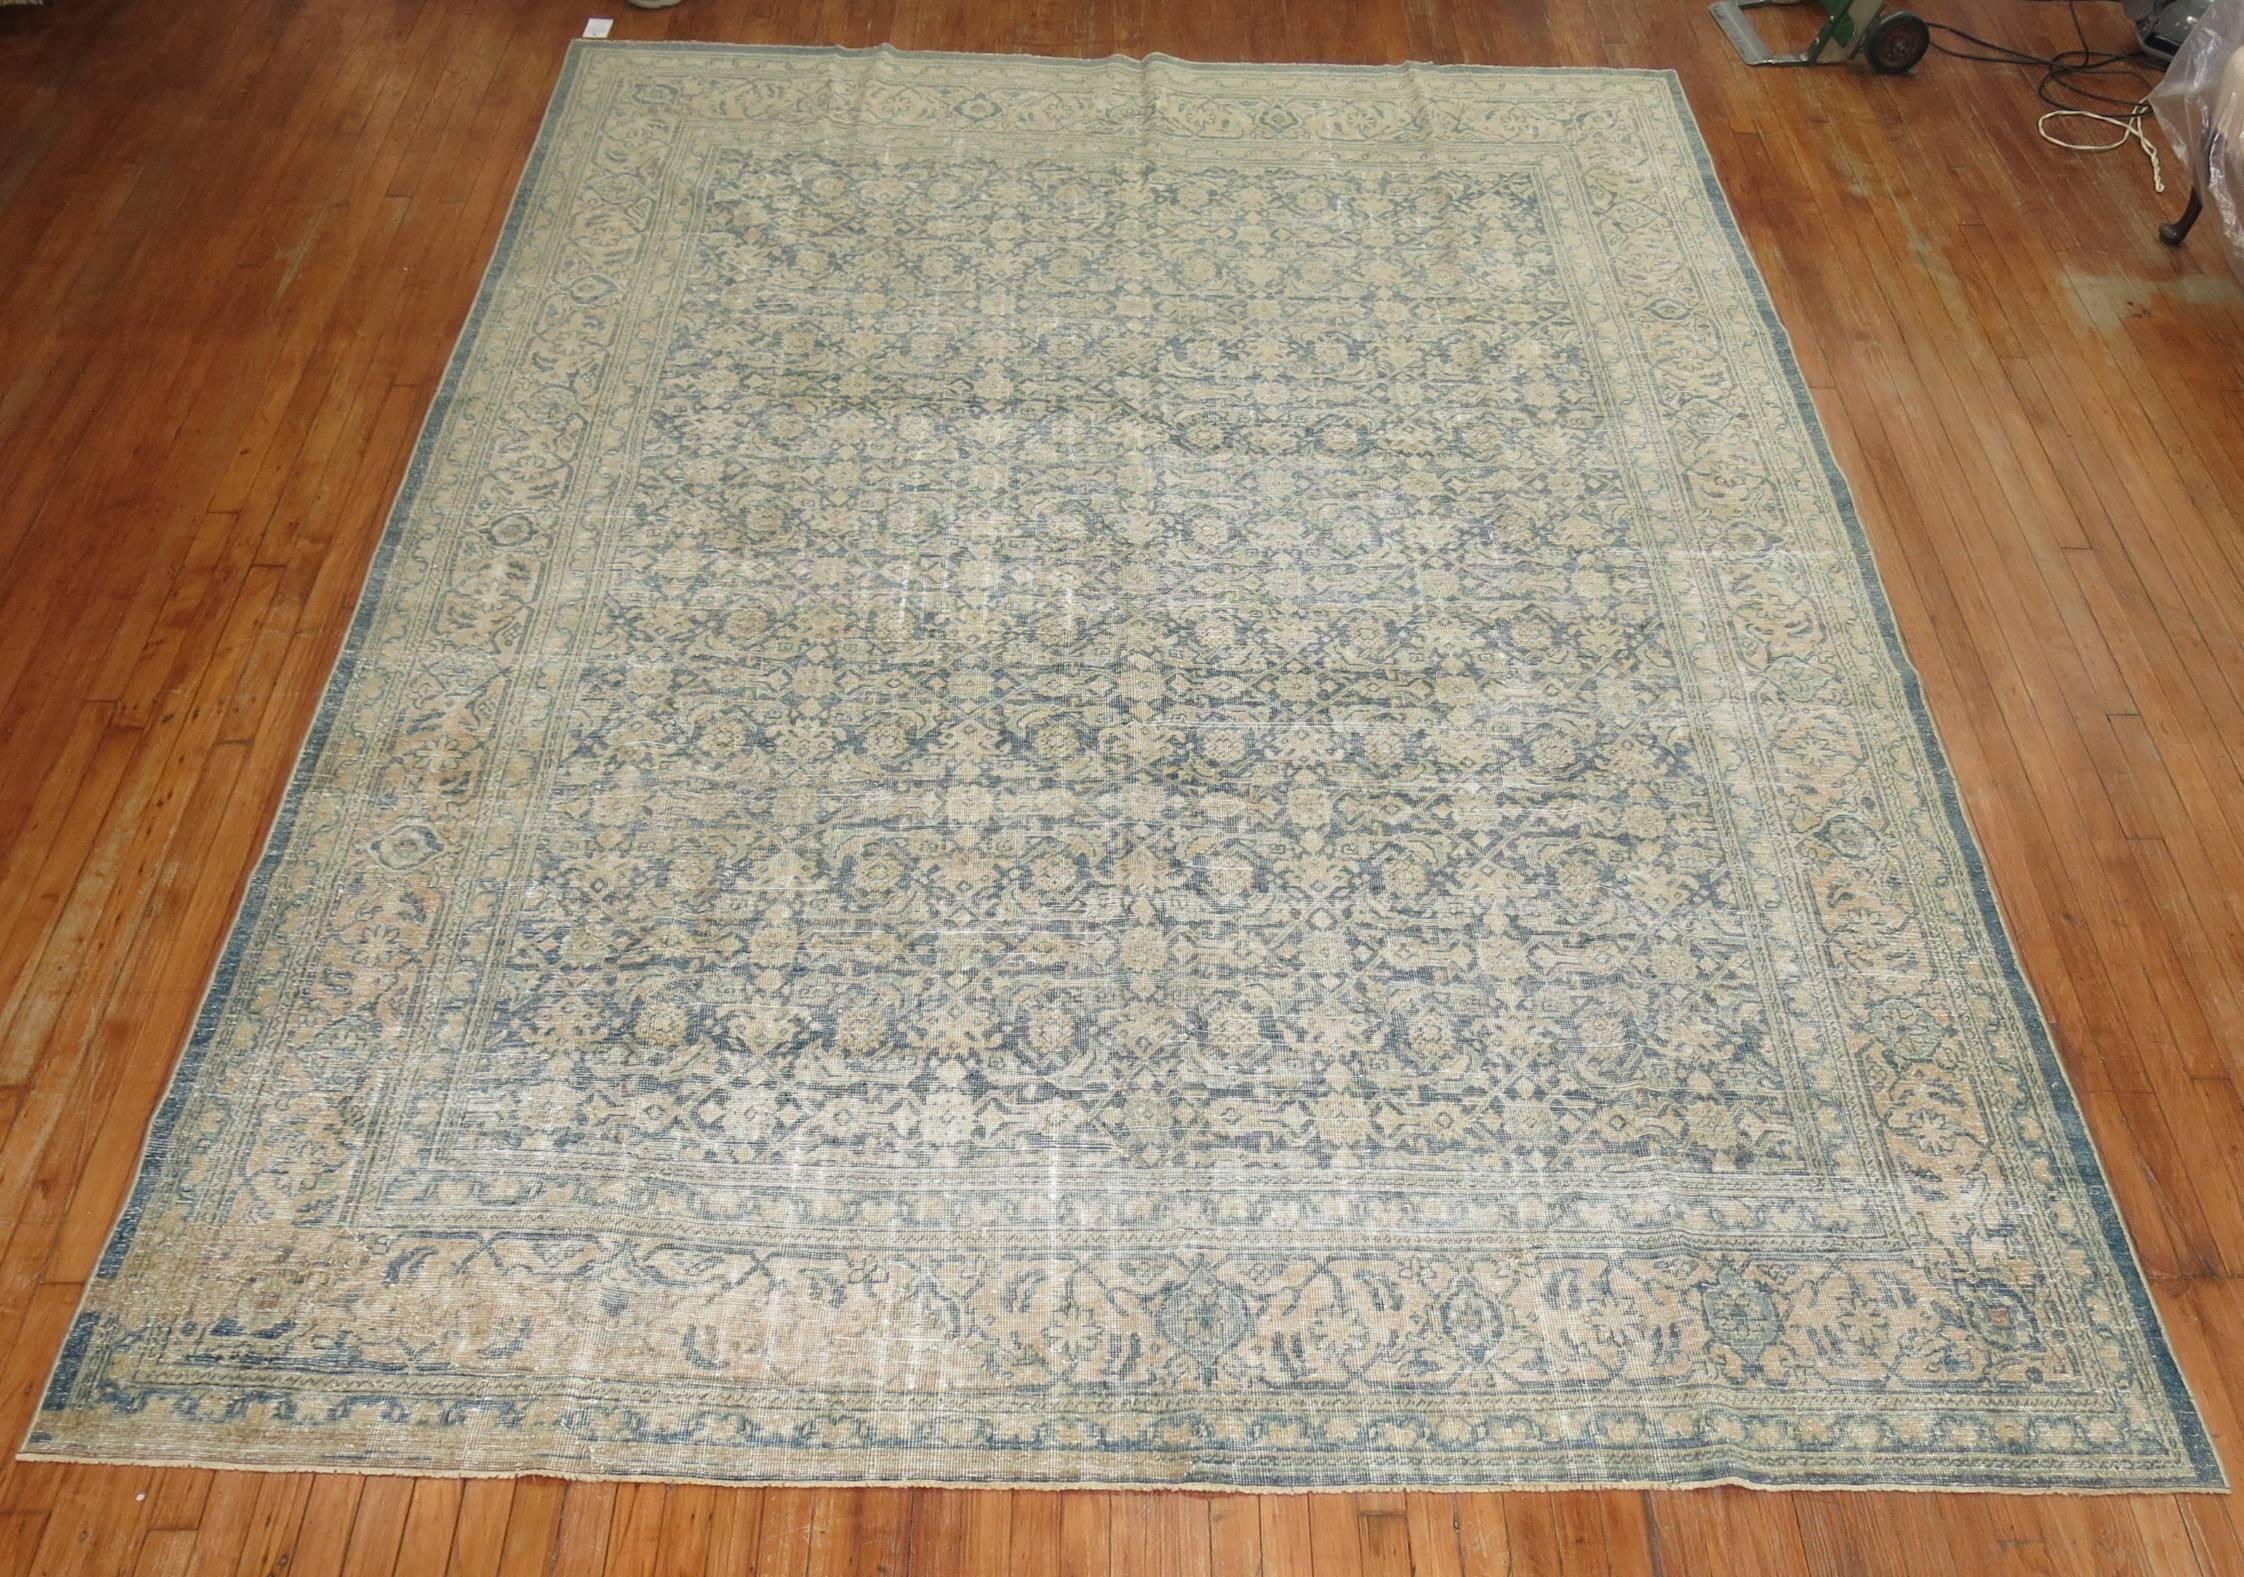 Textured early 20th century Persian Malayer rug with a small-scale all-over herati motif in soft grayish blue and sand tones.

What makes antique Malayer rugs endlessly interesting and popular in the 21st century is their small-scale all-over